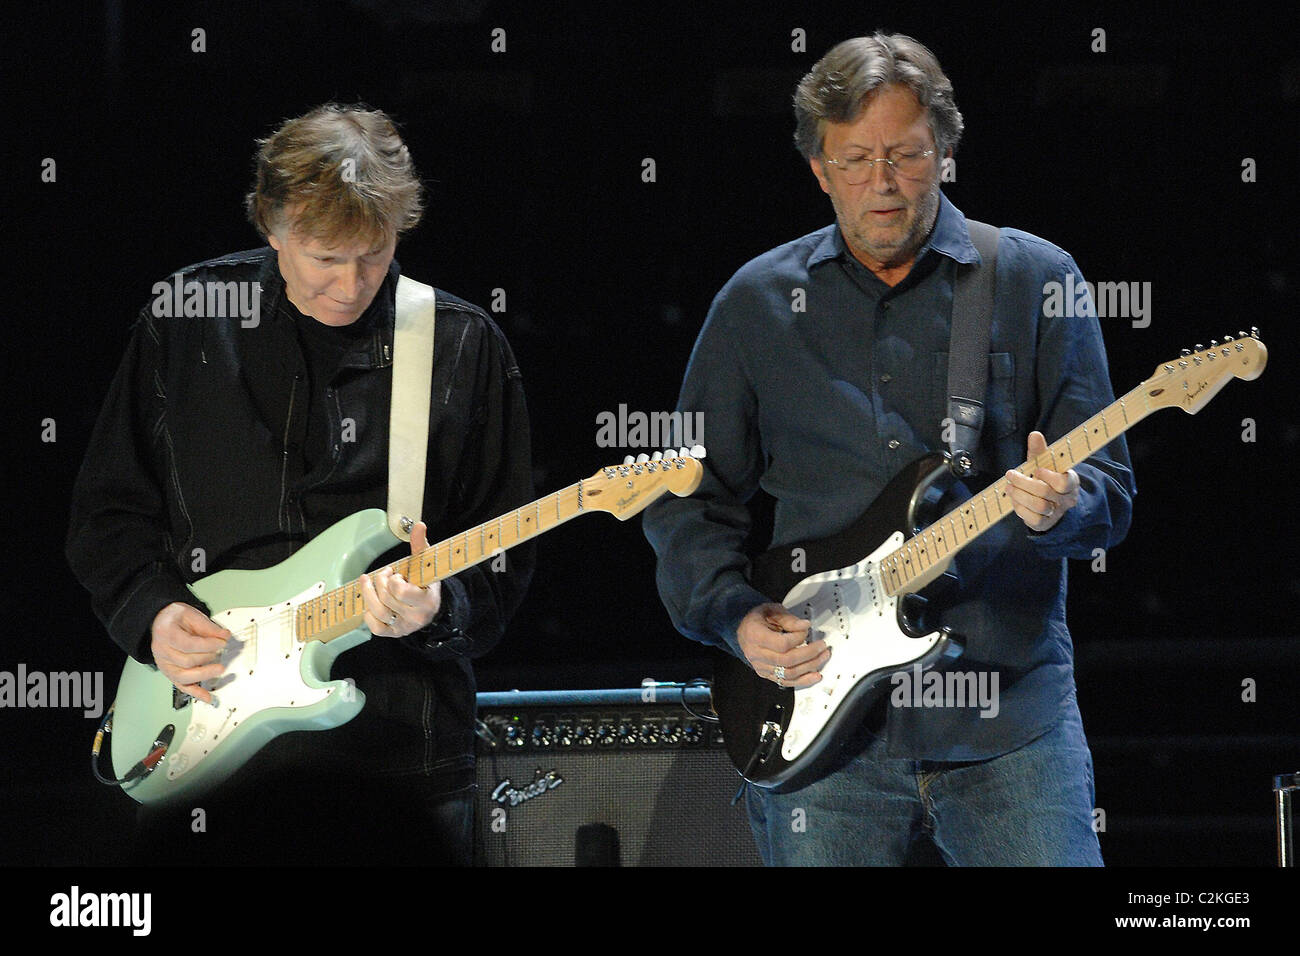 Steve Winwood and Eric Clapton perform live in concert at Madison